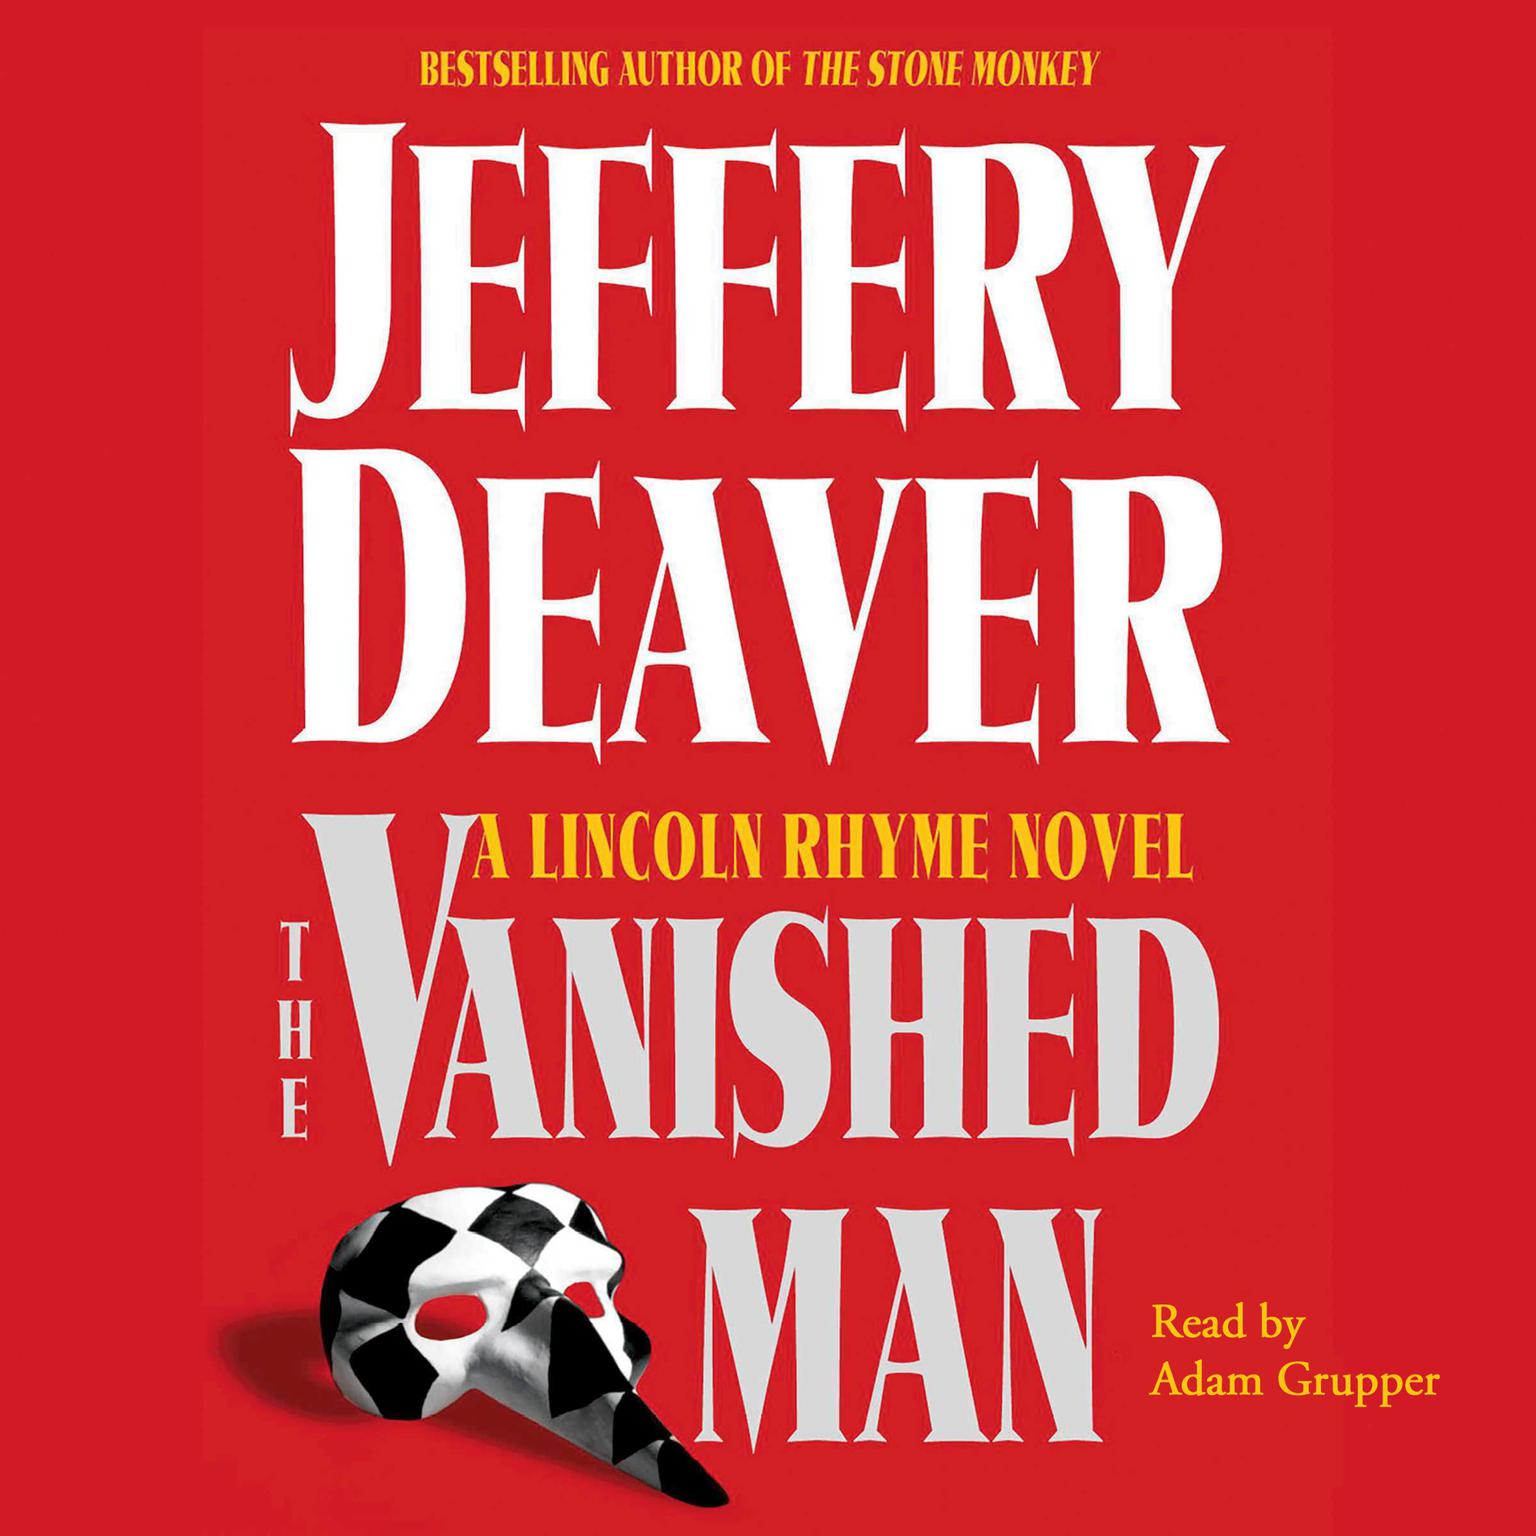 The Vanished Man (Abridged): A Lincoln Rhyme Novel Audiobook, by Jeffery Deaver